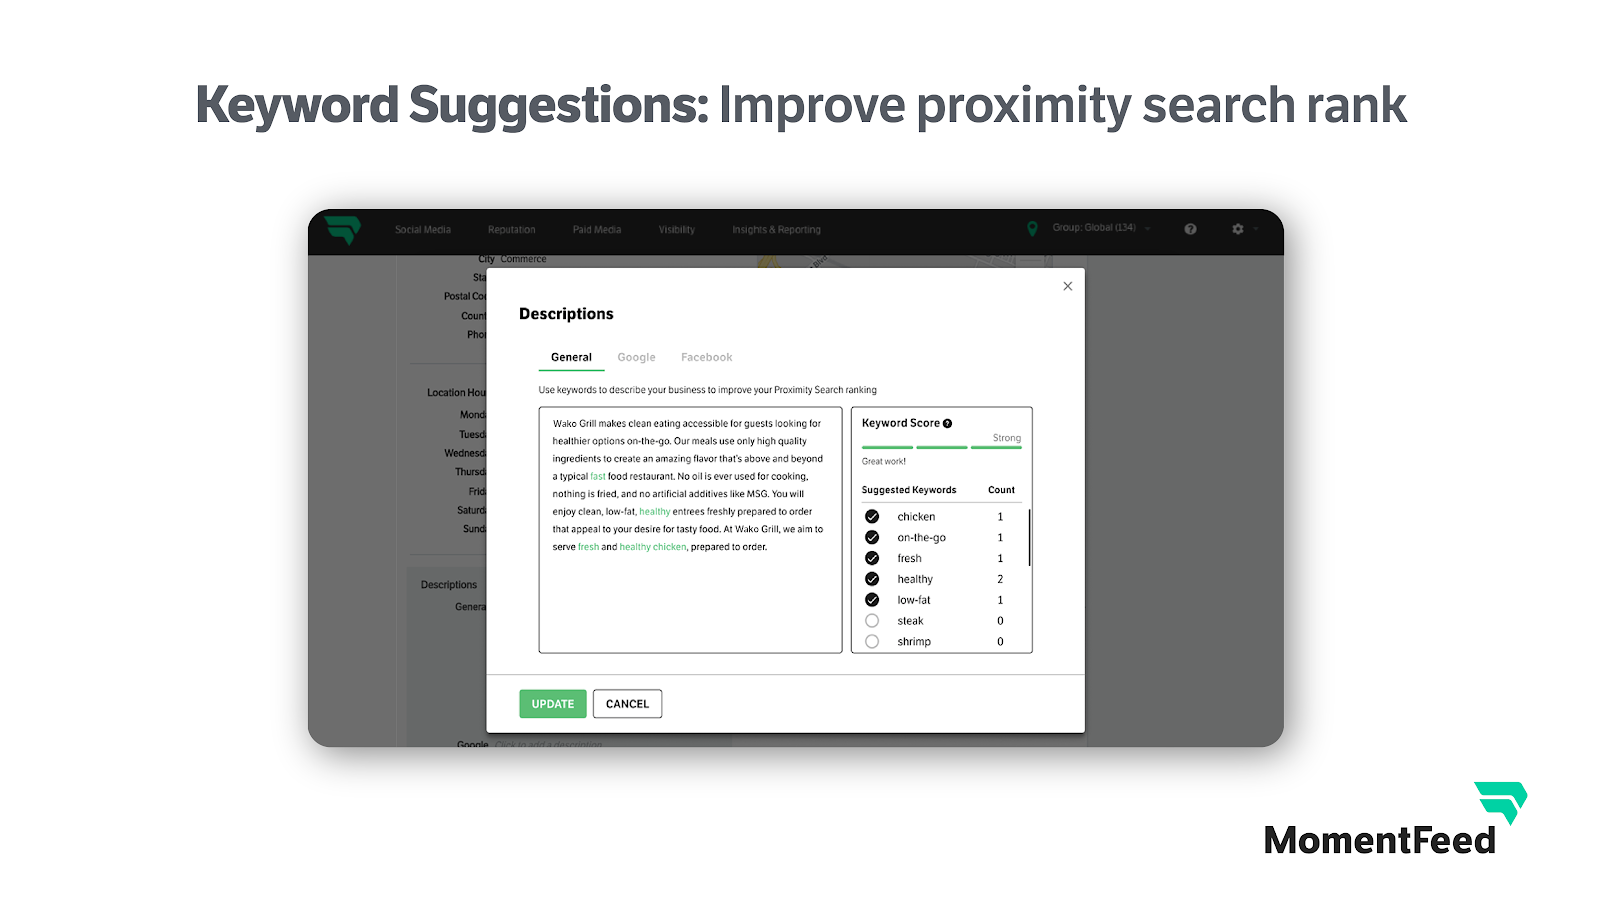 MomentFeed automatically surfaces keyword suggestions and dynamic keyword density scoring to help improve a brand’s Proximity Search Optimization ranking.